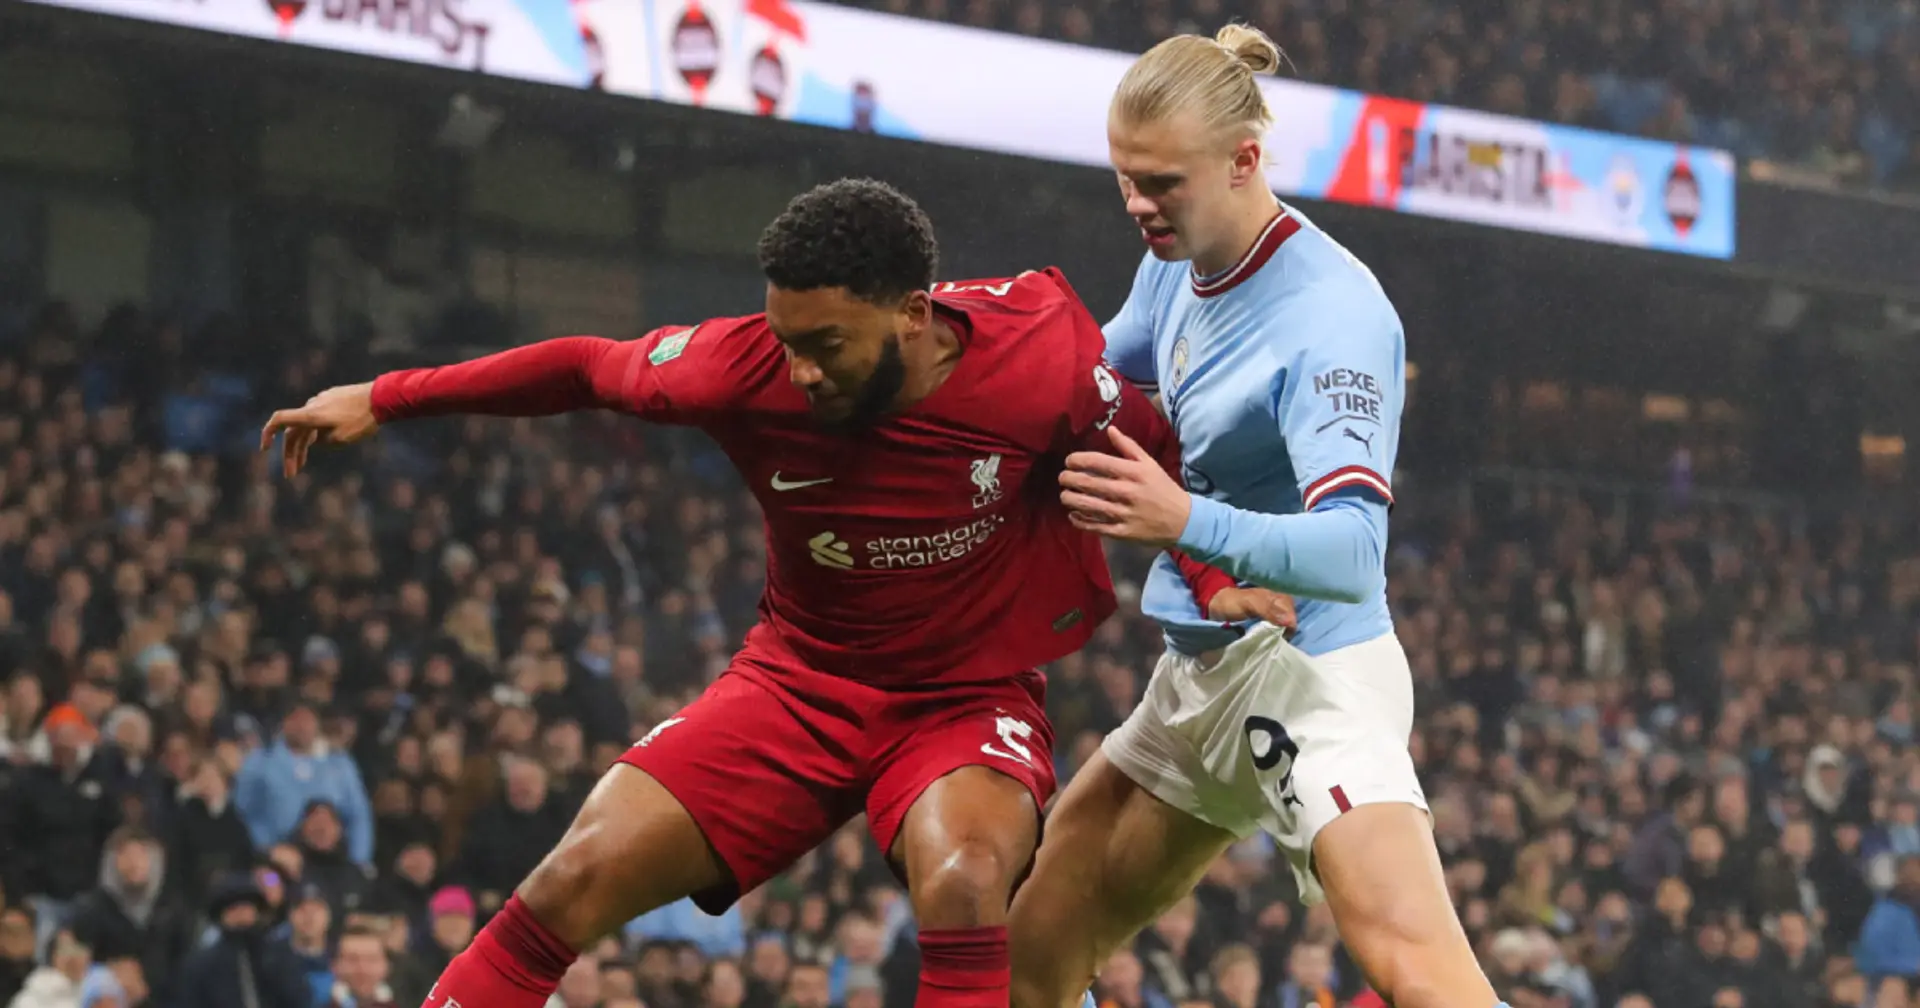 Matip 7, Gomez 5: rating Liverpool players in Man City defeat